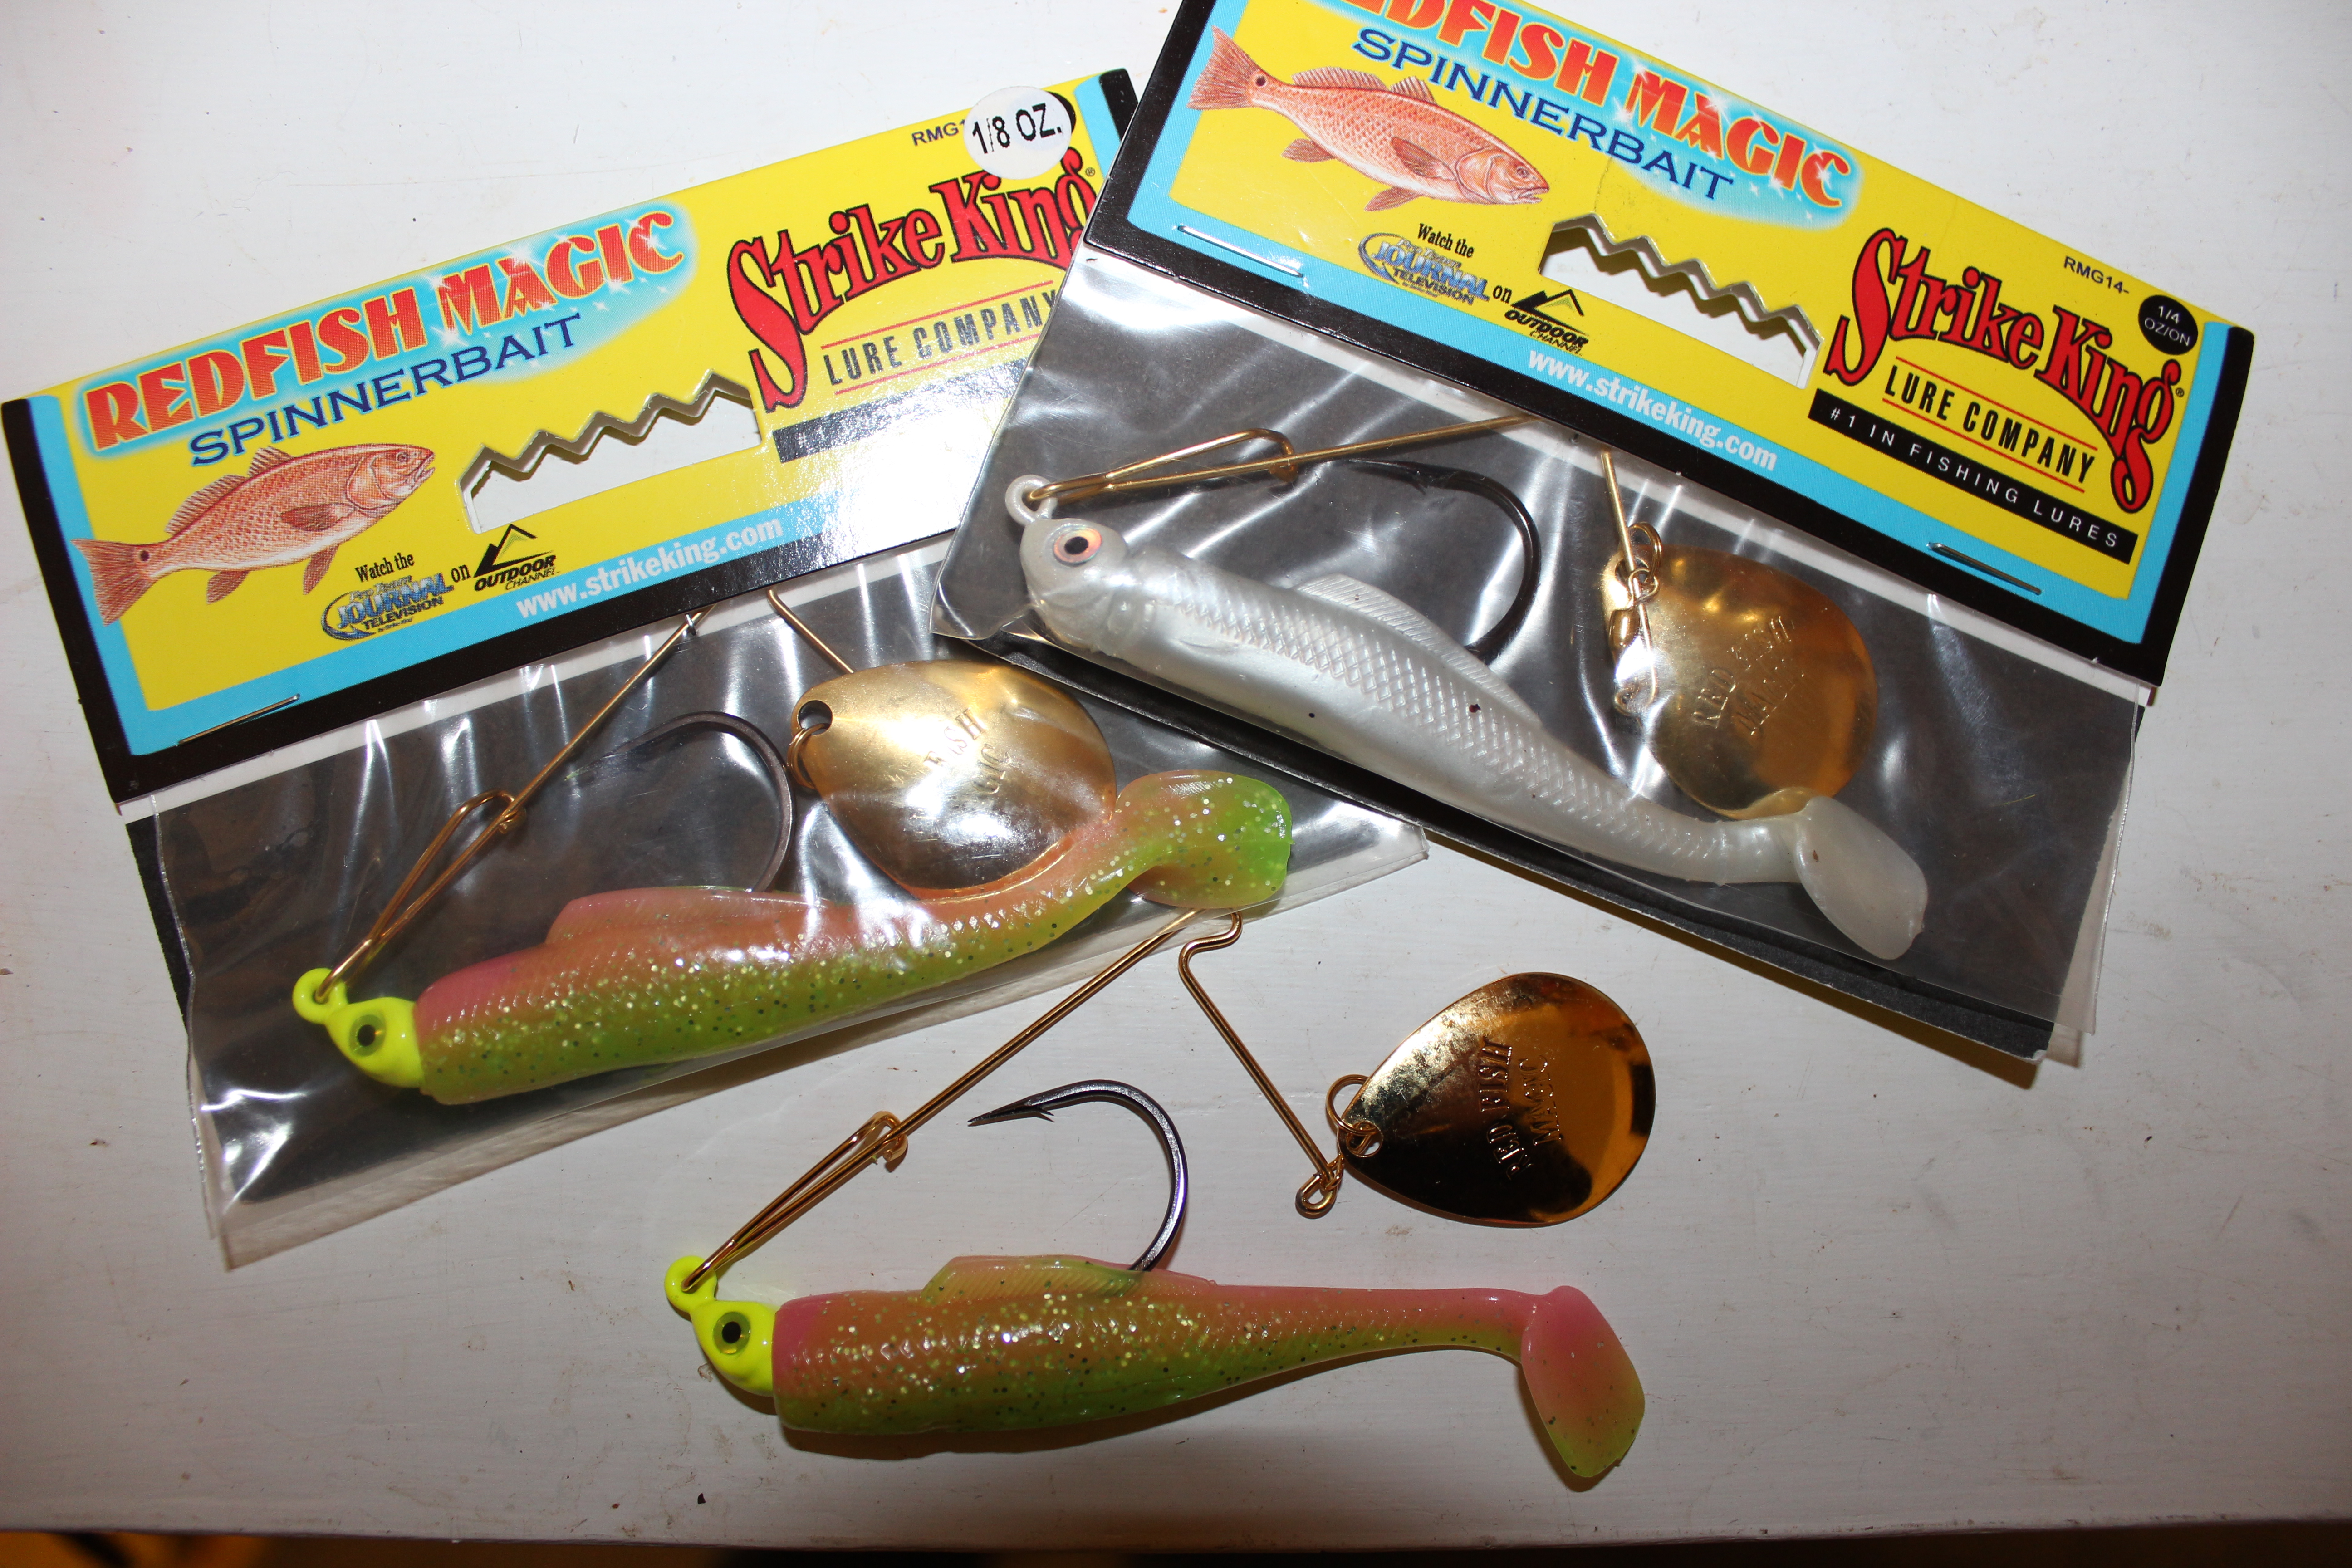 How to catch redfish on the Strike King Redfish Magic.